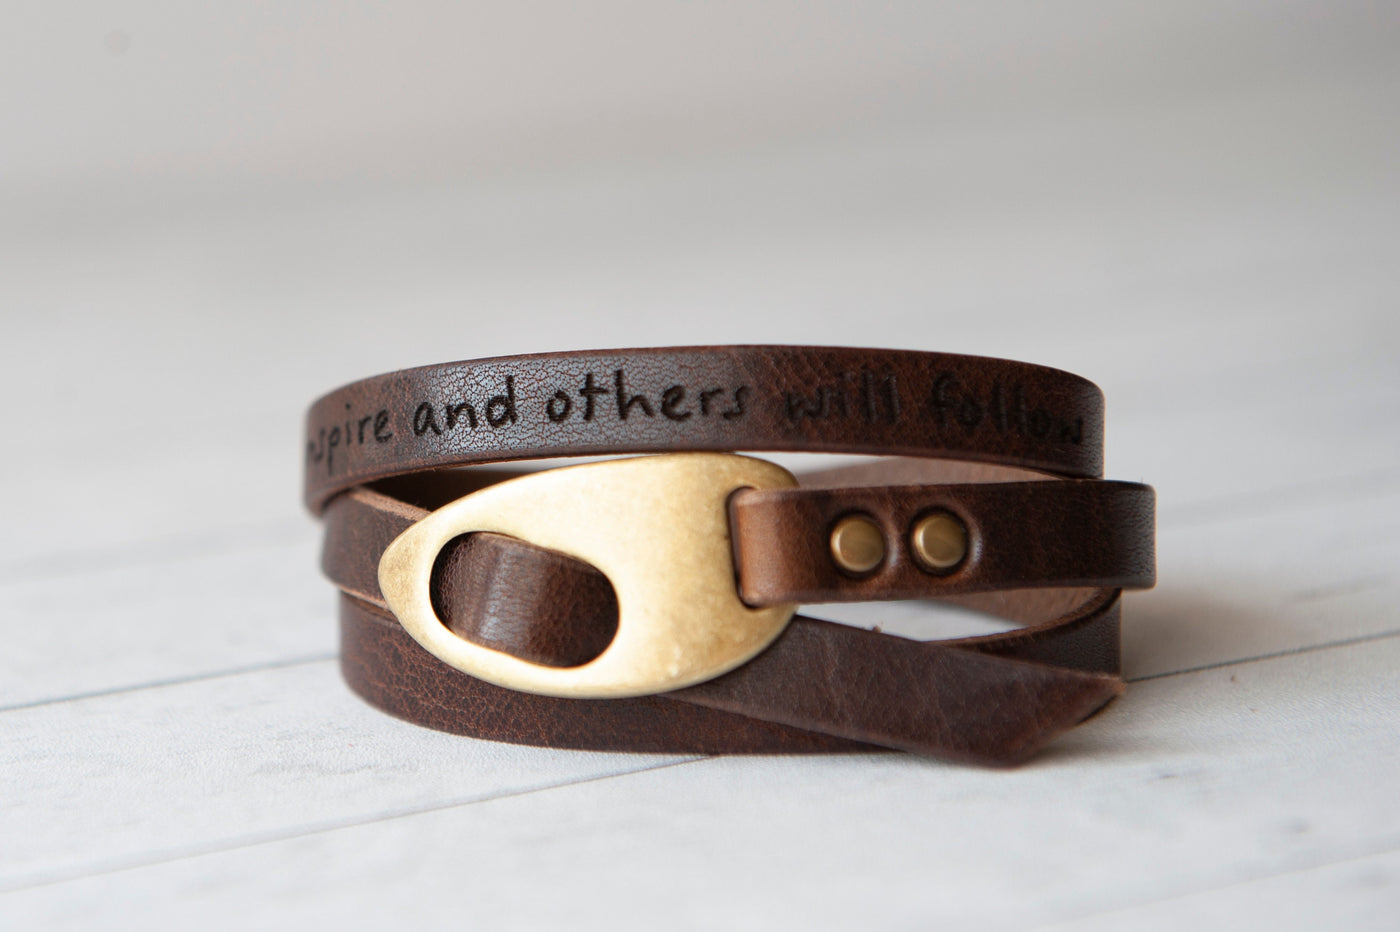 Engraved Leather Bracelet | Olive Green + Antique Brass | Quotes Love Affirmations | Handmade Gift | Personalized For Her For Him